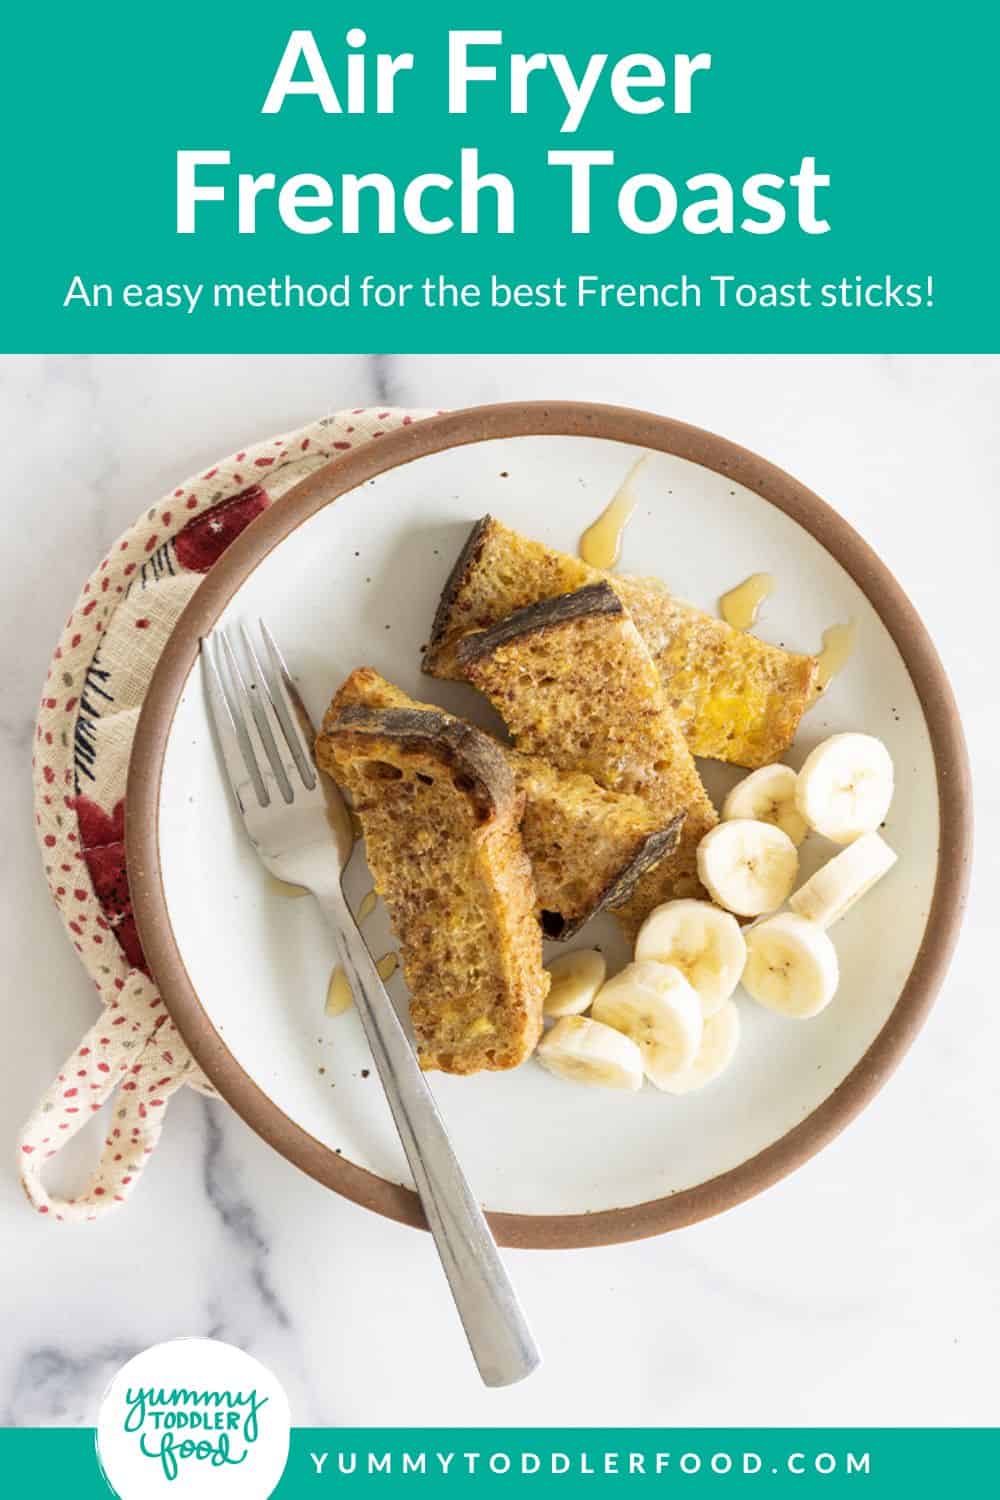 air fryer french toast on air fryer rack.